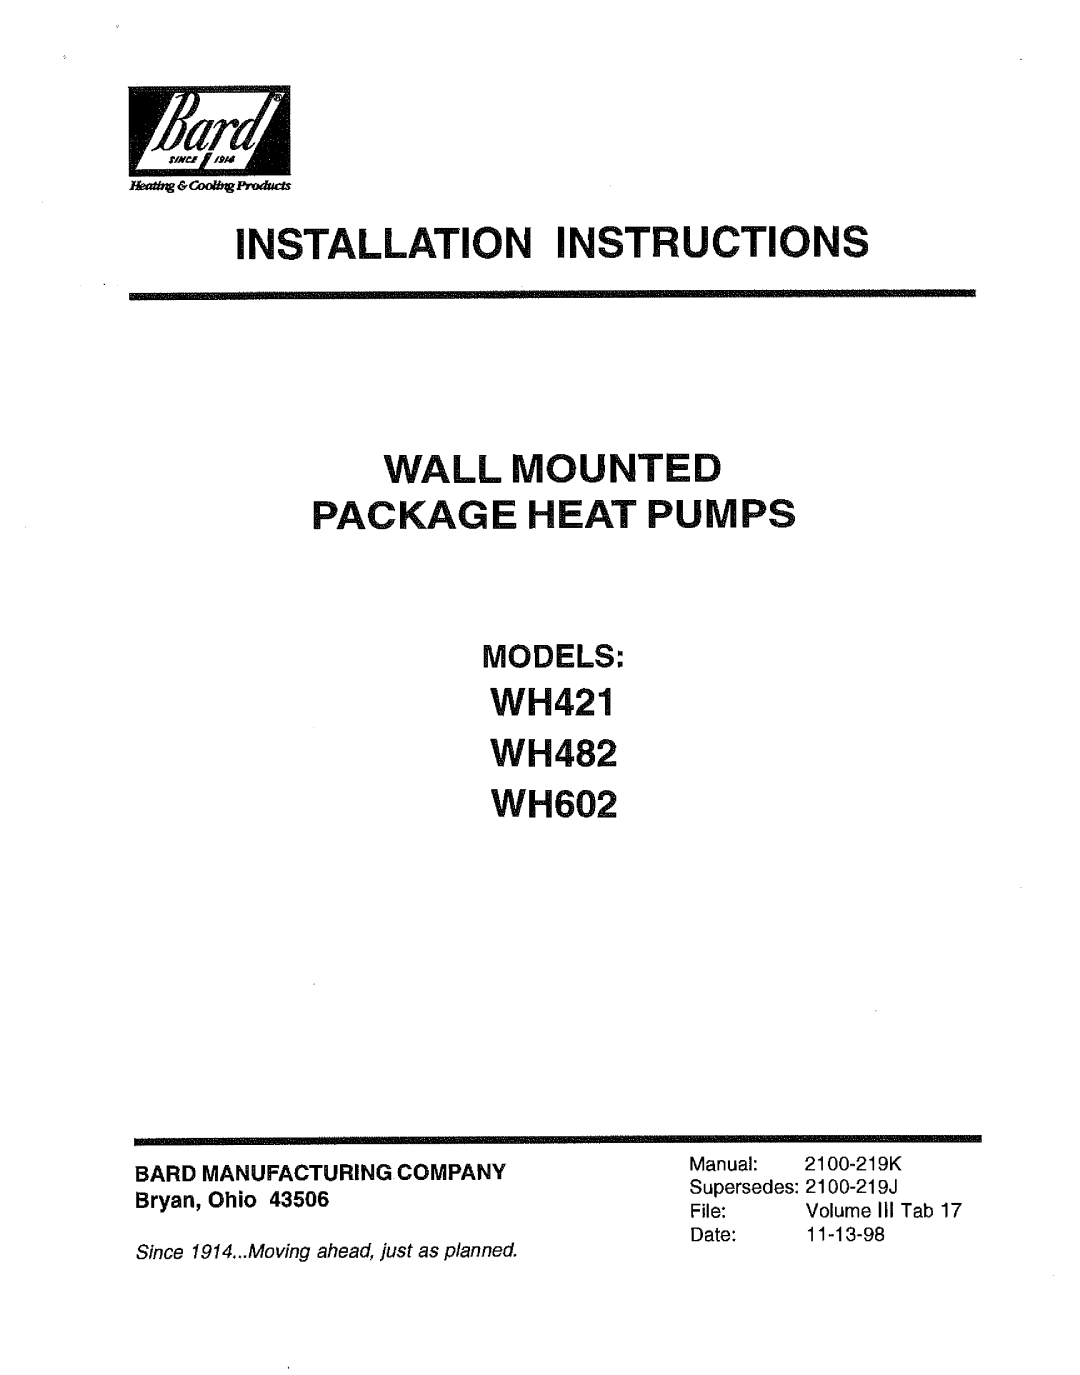 Bard WH602, WH482, WH421 manual 